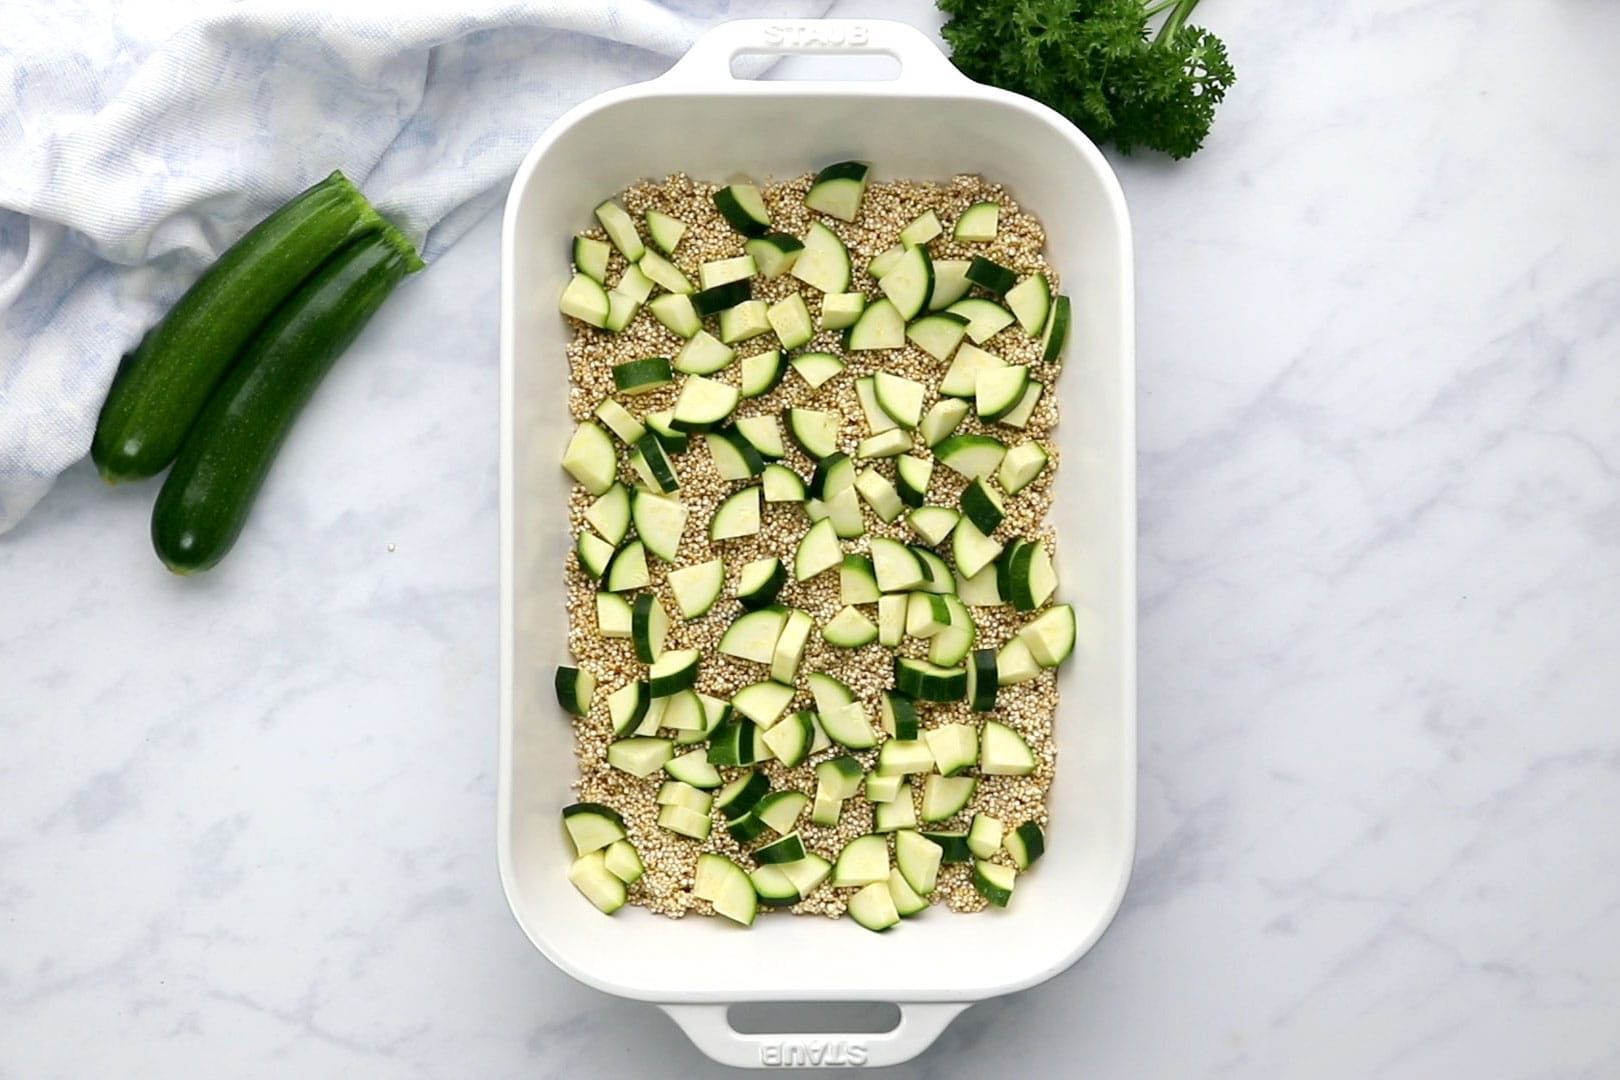 Uncooked quinoa and sliced zucchini in a white casserole dish viewed from overhead